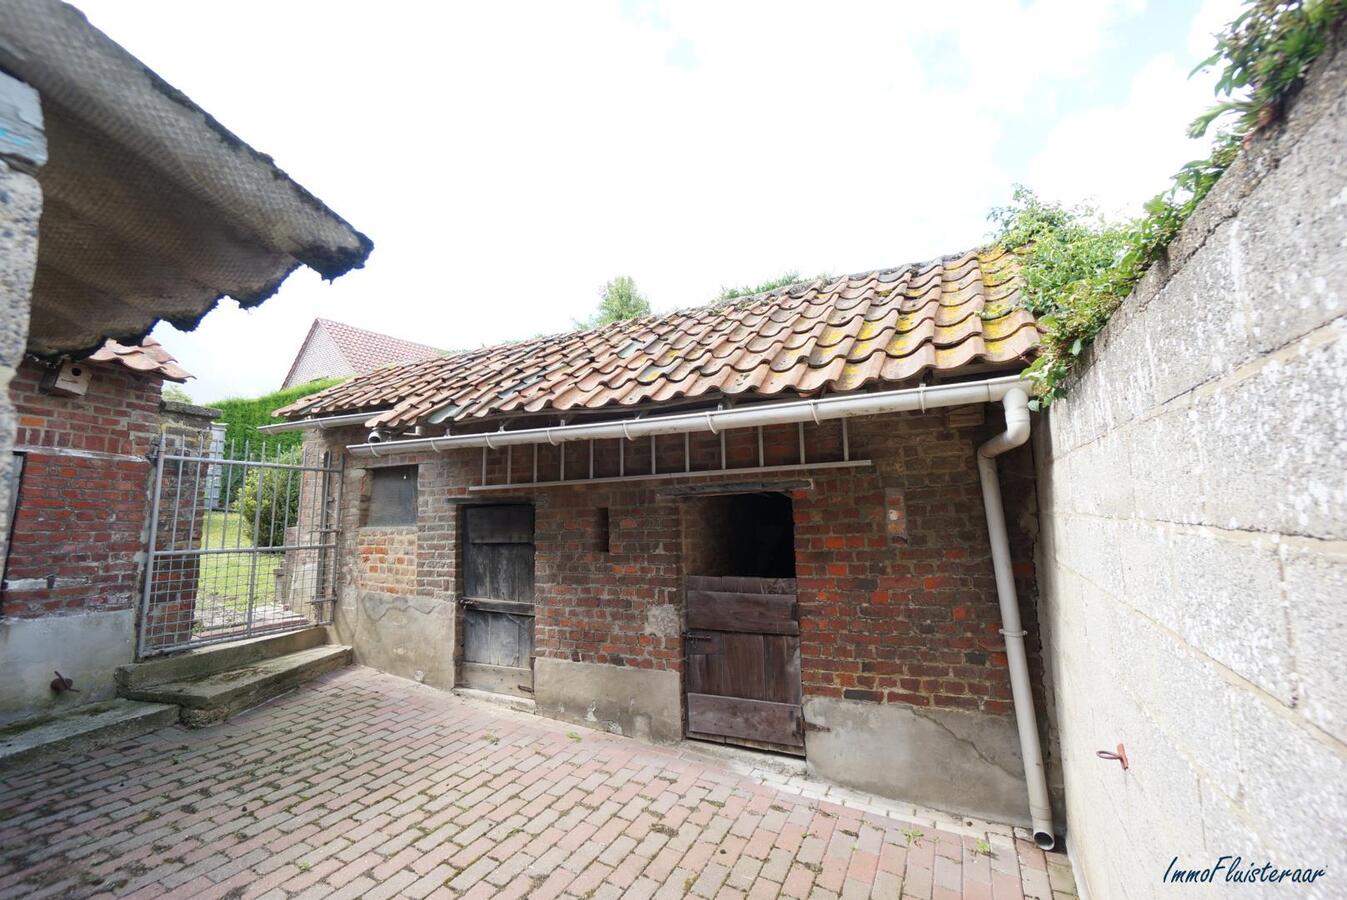 Property for sale |  with option - with restrictions in Horpmaal